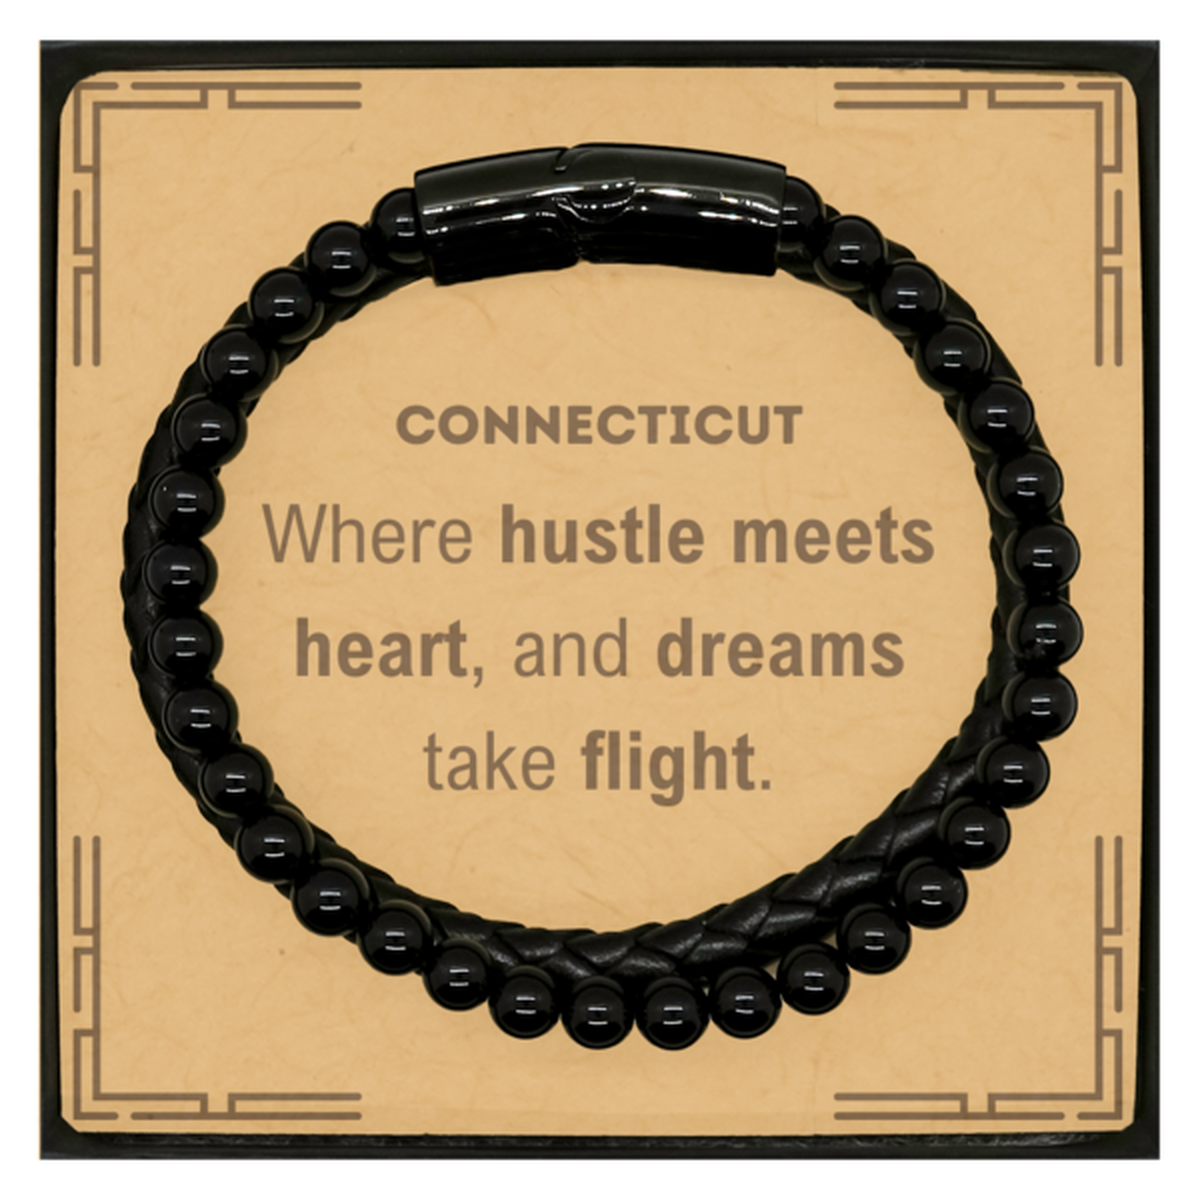 Connecticut: Where hustle meets heart, and dreams take flight, Connecticut Card Gifts, Proud Connecticut Christmas Birthday Connecticut Stone Leather Bracelets, Connecticut State People, Men, Women, Friends